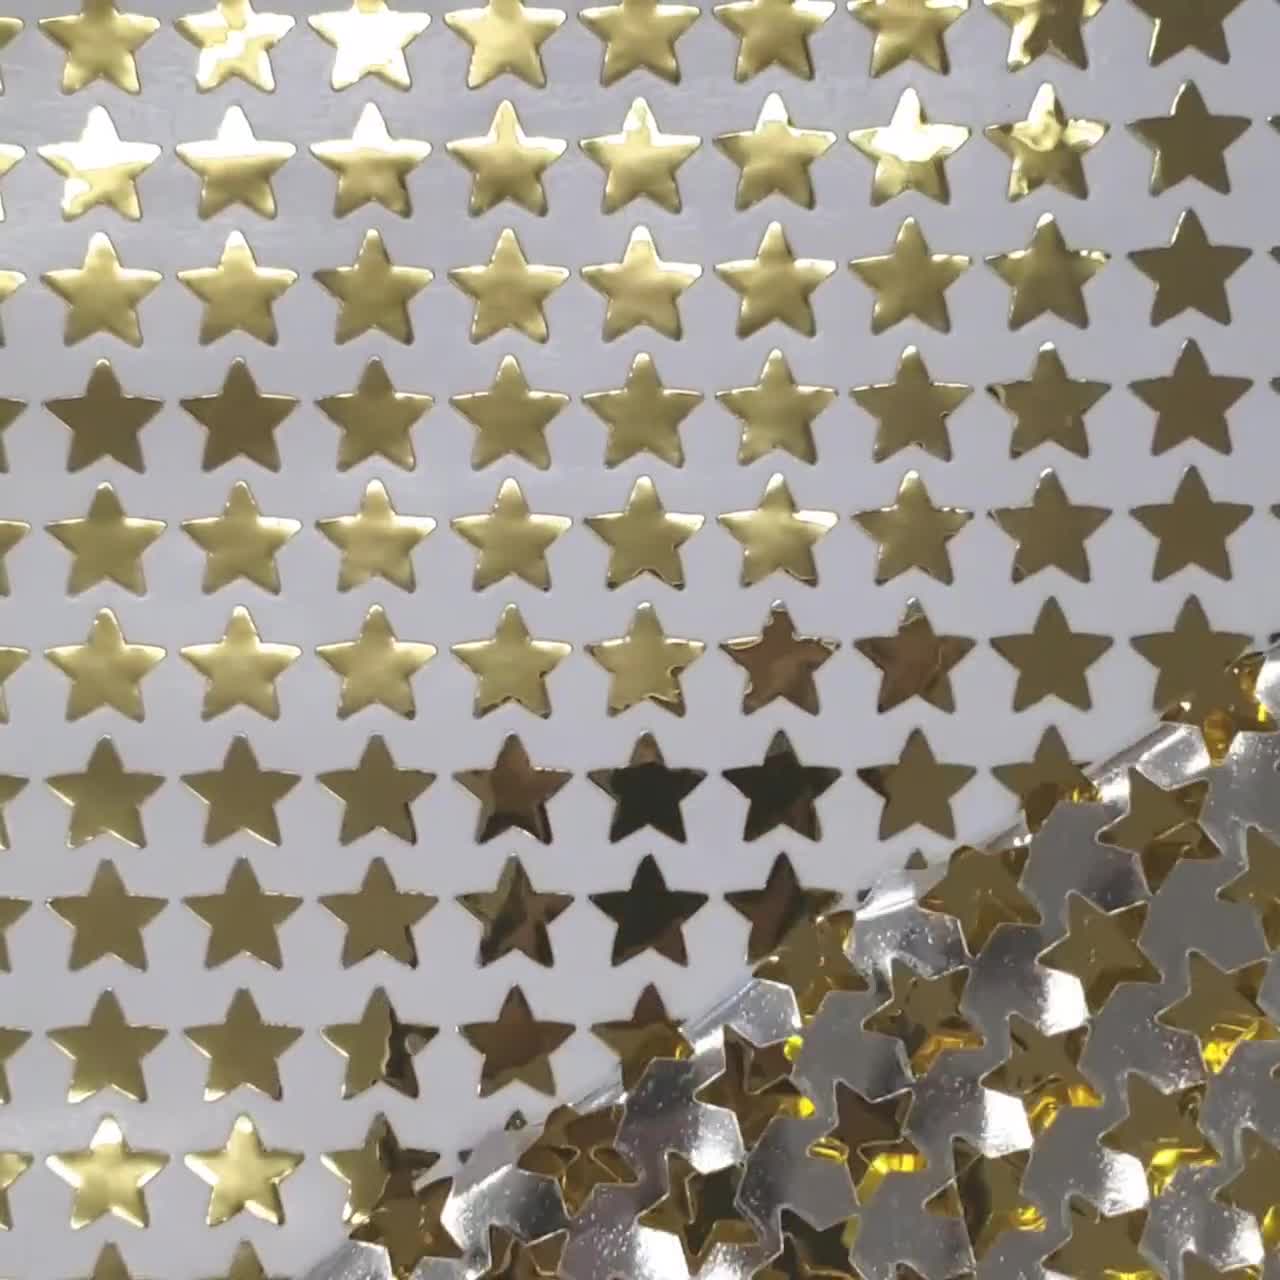 Gold Stars Sticker Sheet, Set of 192 Small Metallic Gold Star Vinyl Decals,  Decorative Stickers for Wedding Meal Choice Cards 